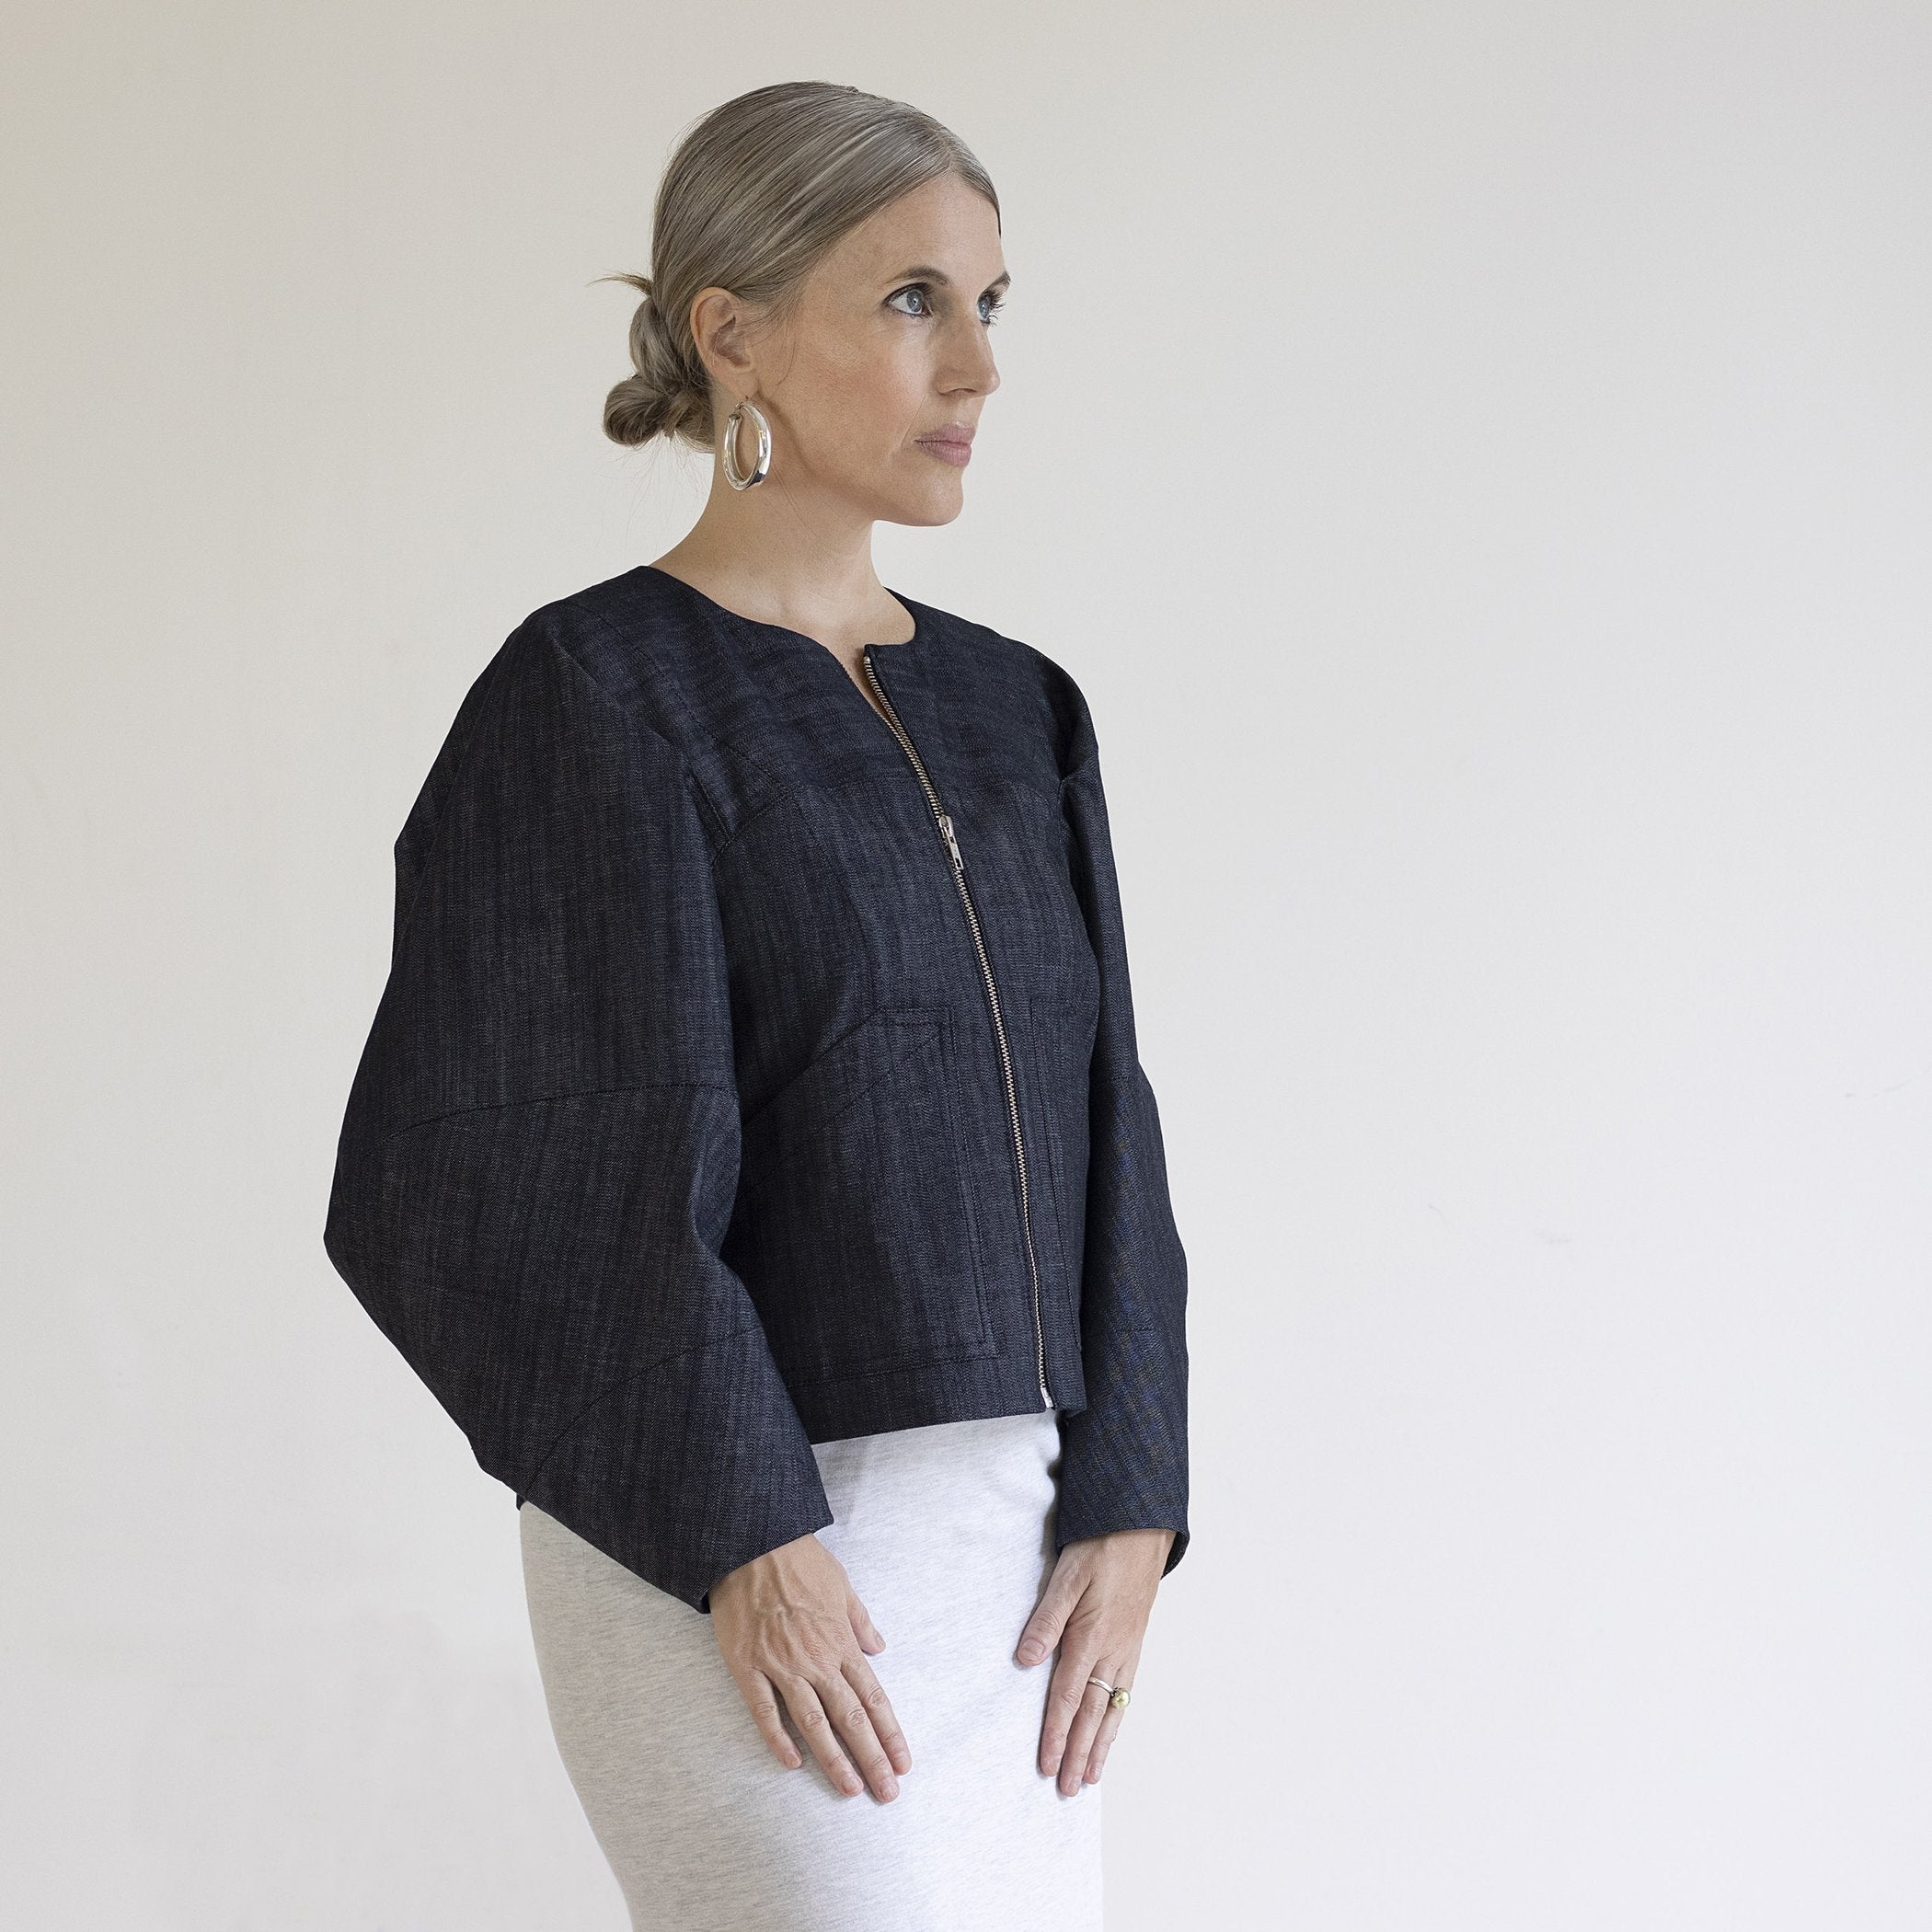 Woman wearing the Falda Jacket sewing pattern from Pattern Fantastique on The Fold Line. A jacket pattern made in outerwear weight cotton fabrics, featuring front patch pockets, centre front zipper closure, round neckline, voluminous sleeves and relaxed f